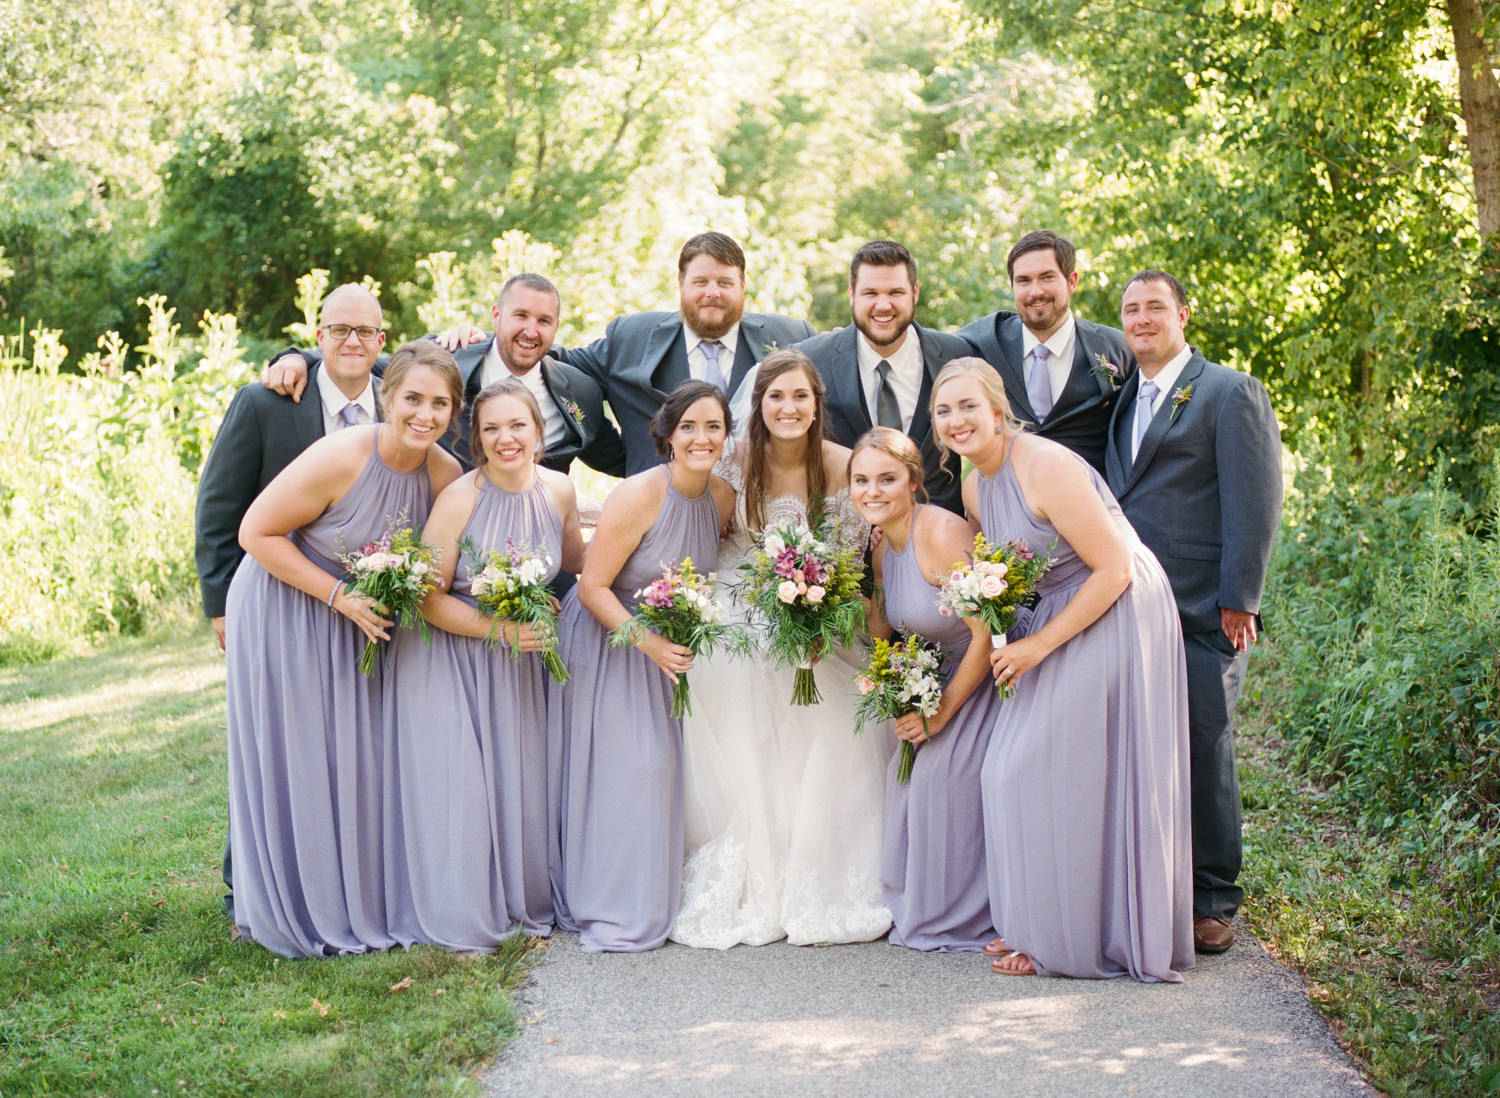 Wedding party in lavender gowns and dark gray suits; St. Louis wedding photographer